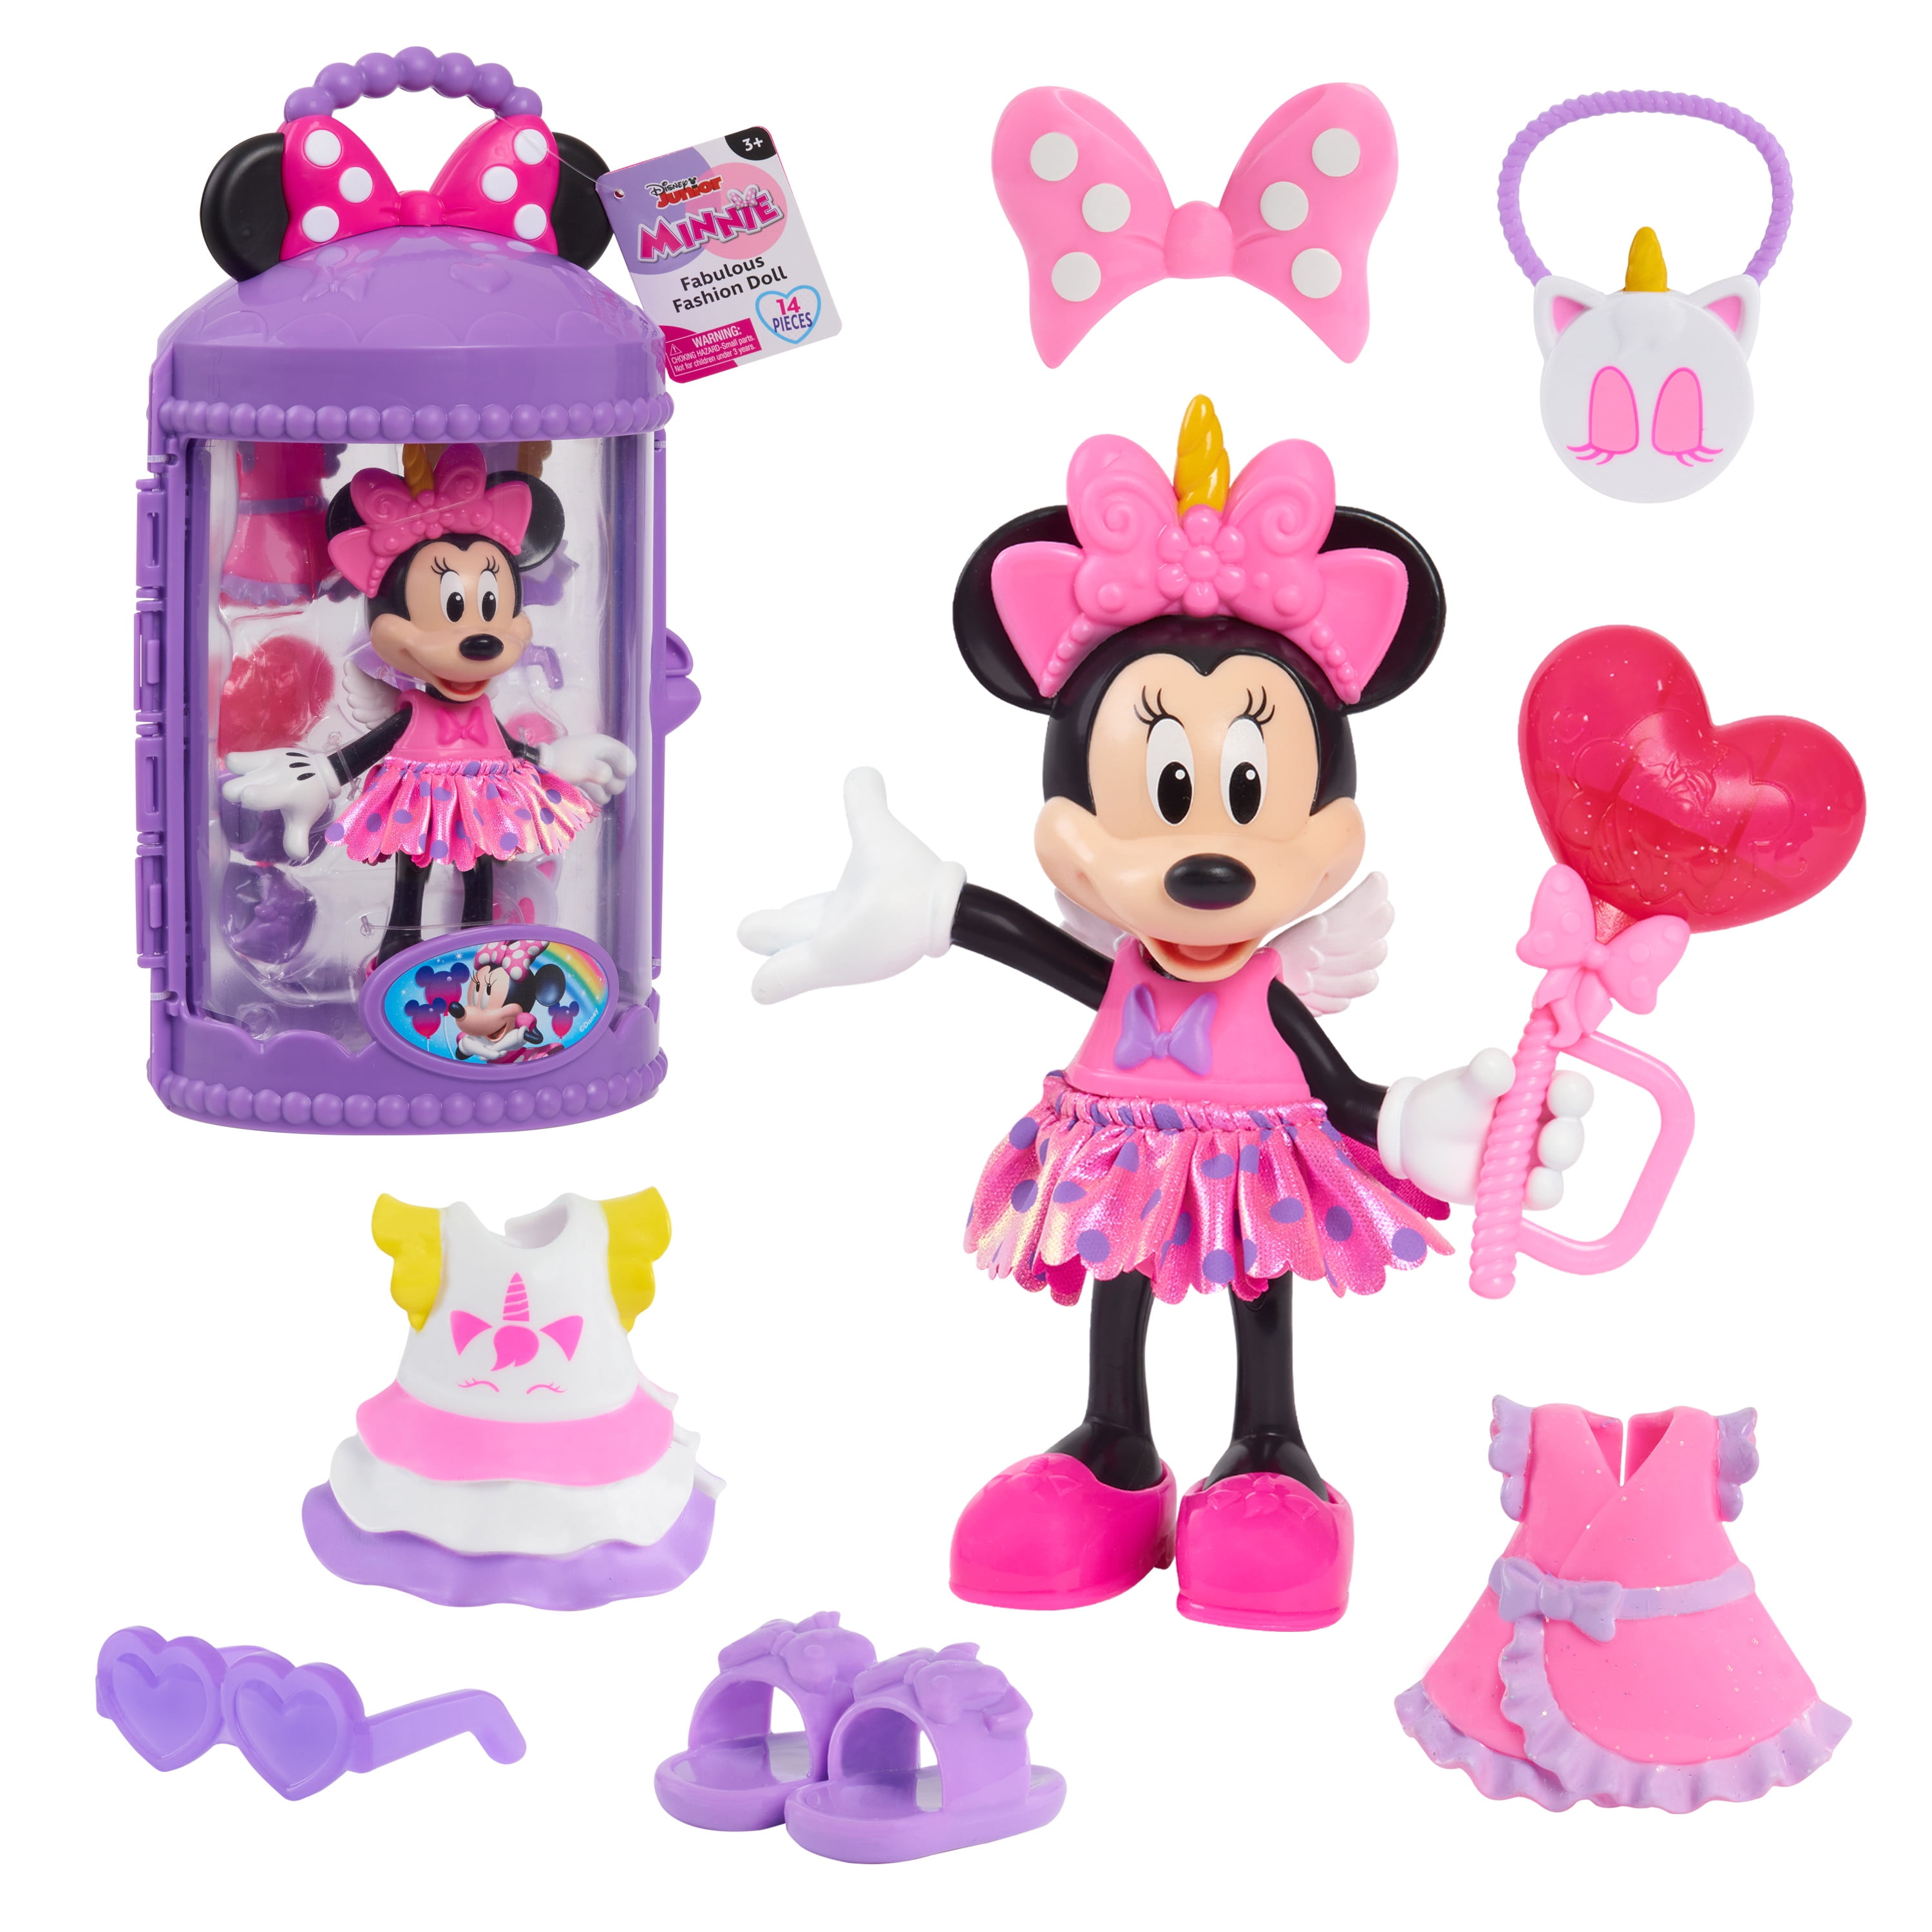 Minnie Mouse Disney Playland W/ 20 Balls Girls Play Gift for sale online 